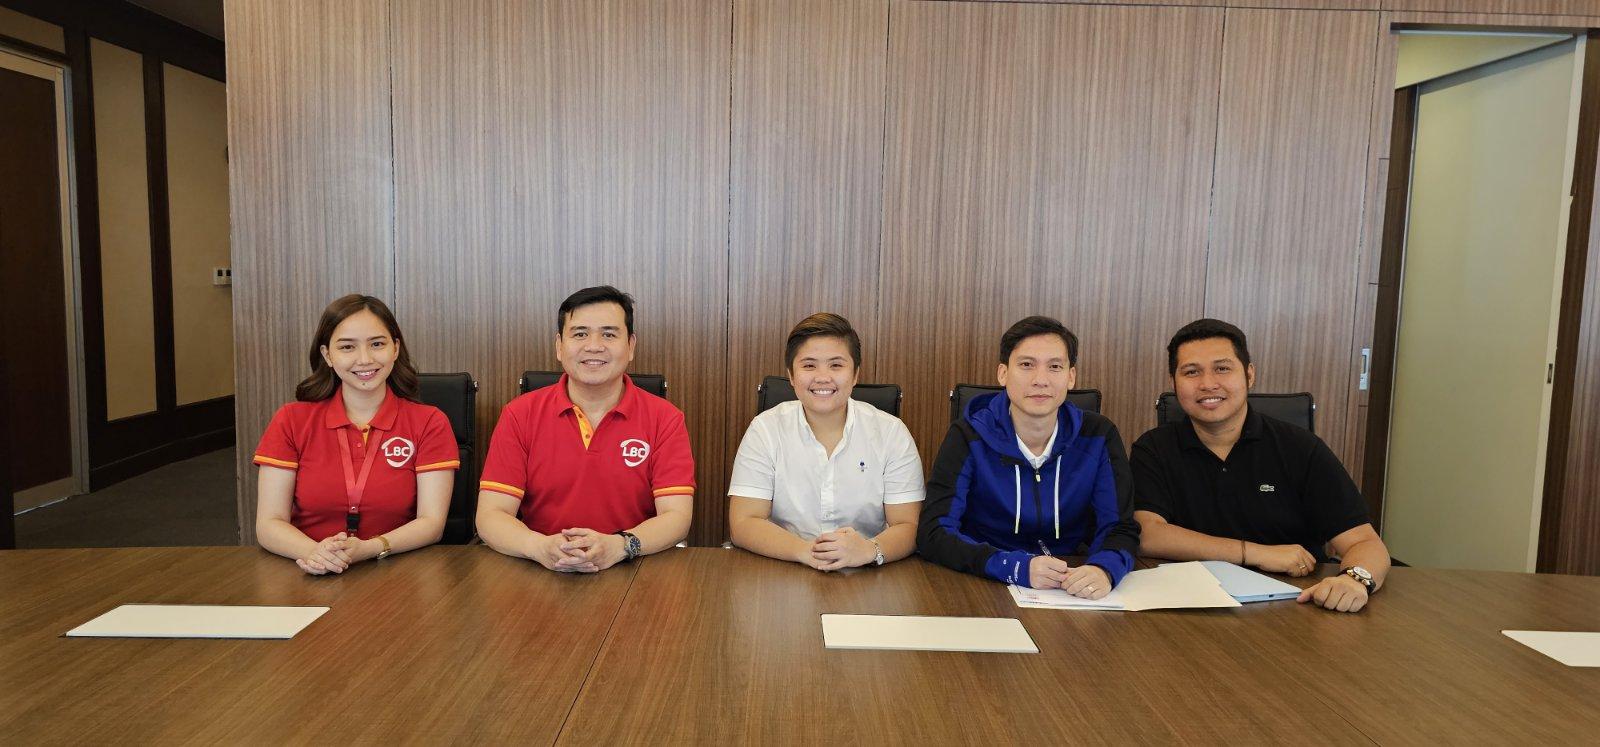 LBC Business Solutions and Gencys Digital Commerce Partner to revolutionize e-commerce and help Filipinos succeed